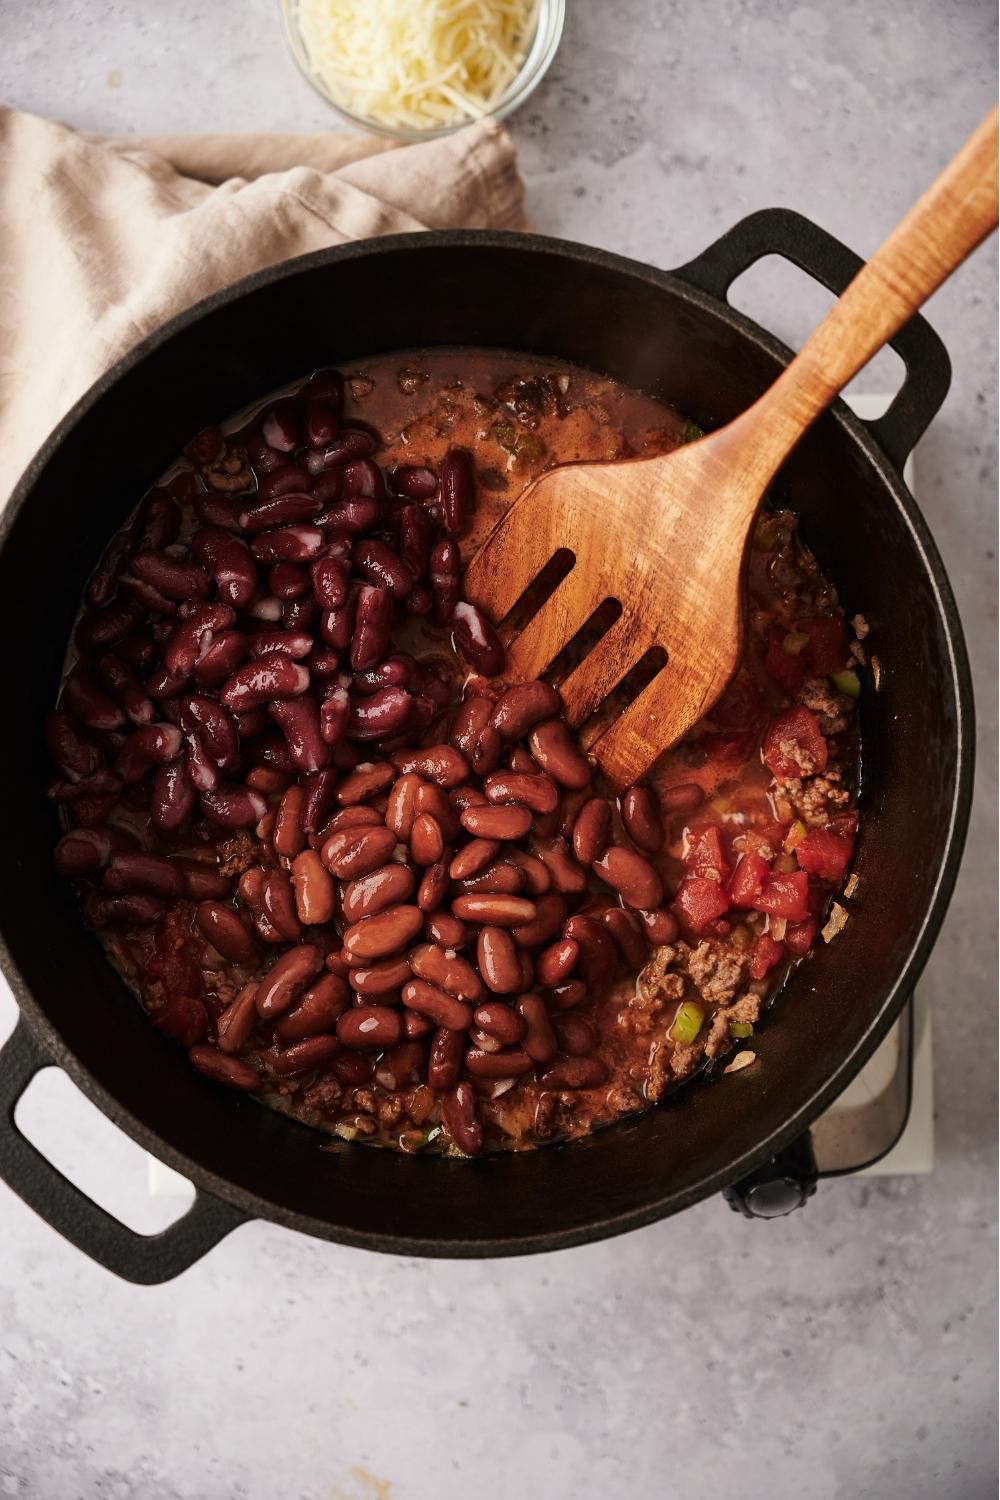 A large pot with chili simmering in the pot and a slotted wooden spatula in the pot. Kidney beans and pinto beans have just been added to the pot and have not yet been stirred. The pot sits on a grey counter next to a white kitchen towel and a small bowl of shredded cheese.